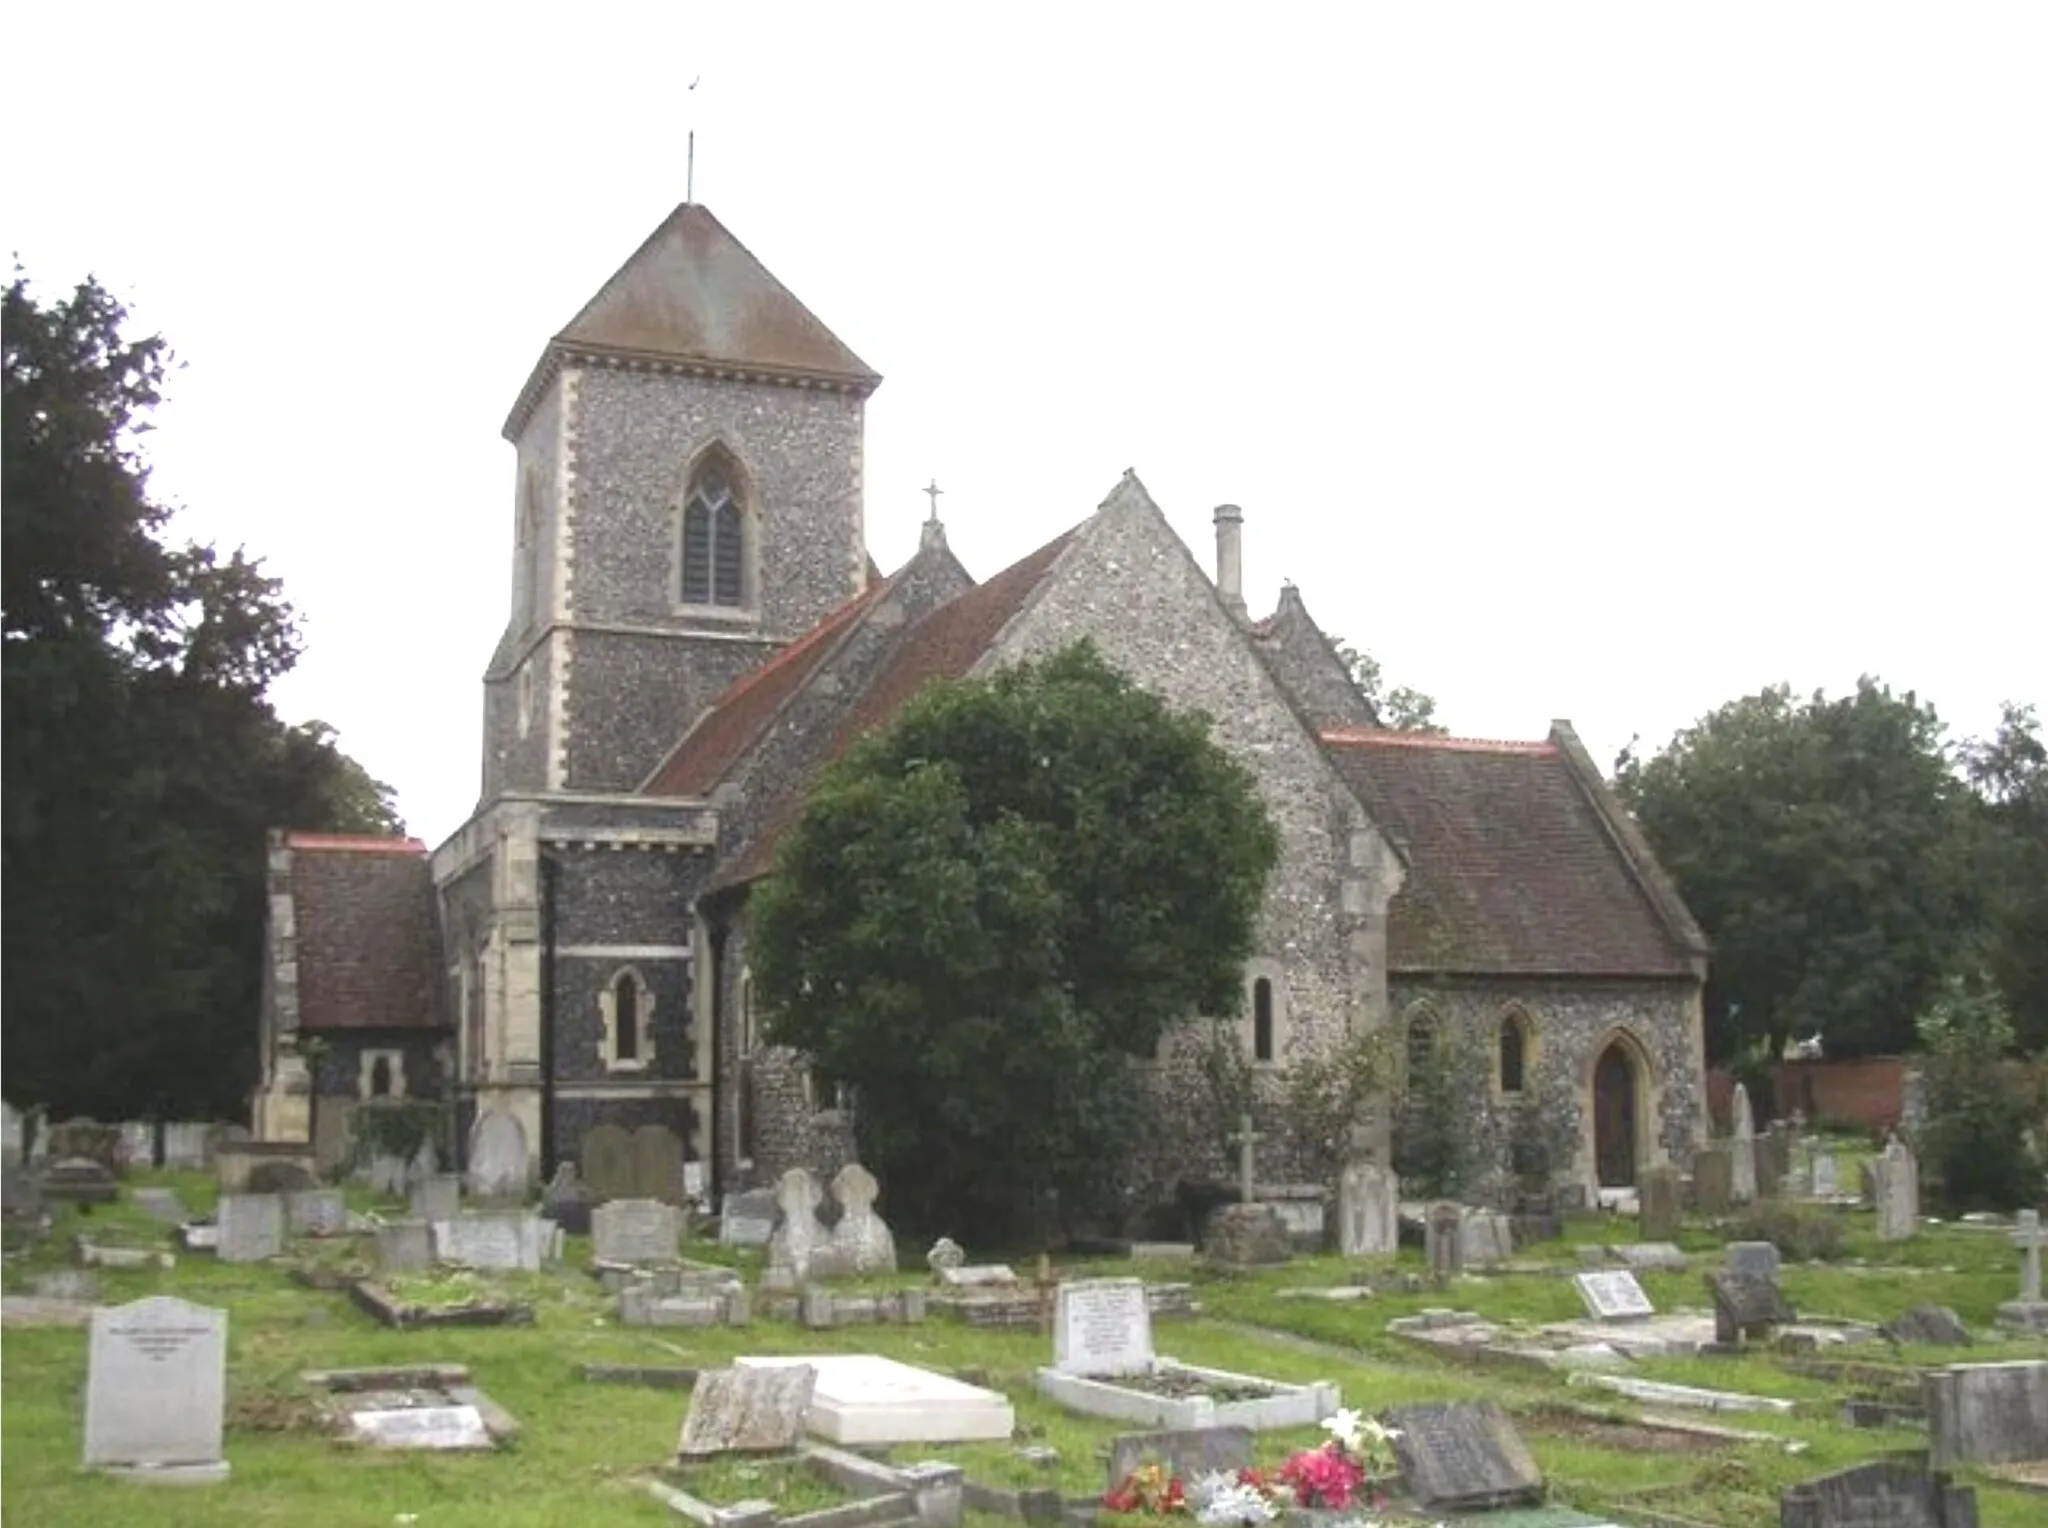 Photo showing: St Mary's Church,  Addington, near to Addington, Croydon, Great Britain.
The village of Addington goes back to pre-Norman times, and despite it being only a few miles from the centre of Croydon, it still retains its small village atmosphere (but in recent decades without shops or post office!).  The Church, built in 1080 with later additions, and nearby Palace on the edge of the village (Addington Palace) was used regularly by Archbishops of Canterbury in earlier centuries, and indeed five Archbishops of Canterbury are buried at the church.